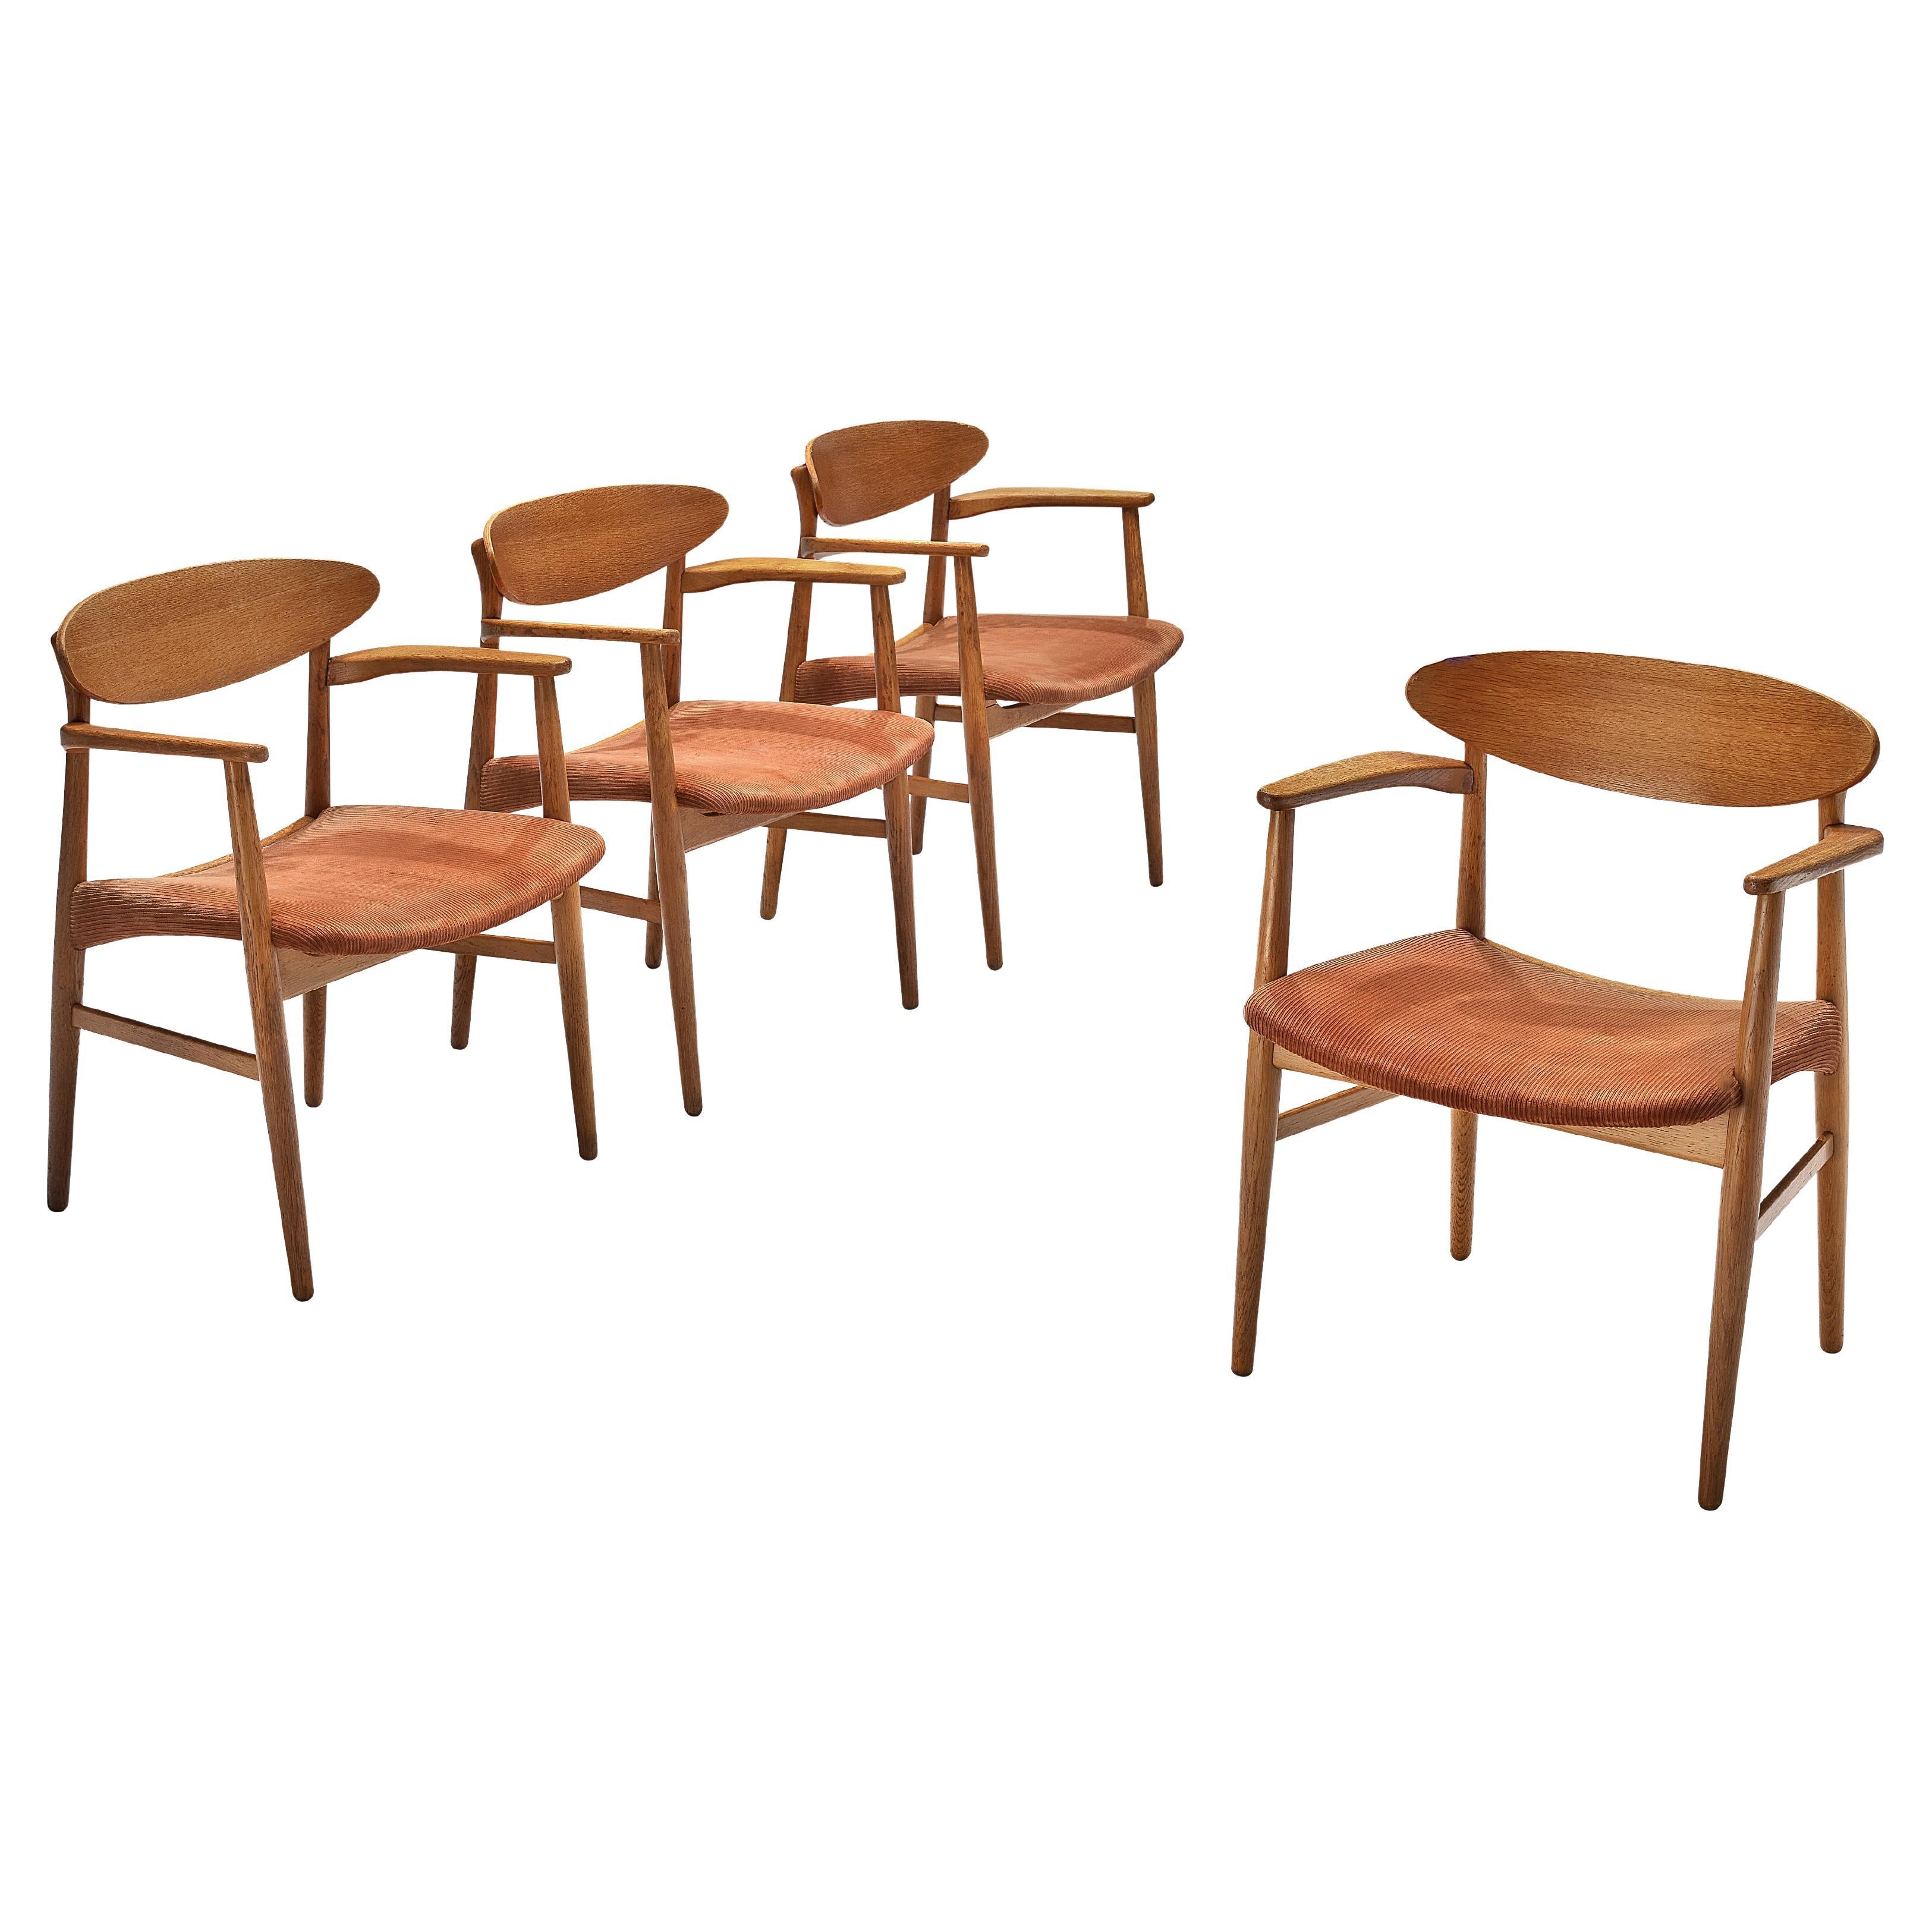 Larsen & Bender Madsen Set of Four Dining Chairs in Oak and Red Upholstery